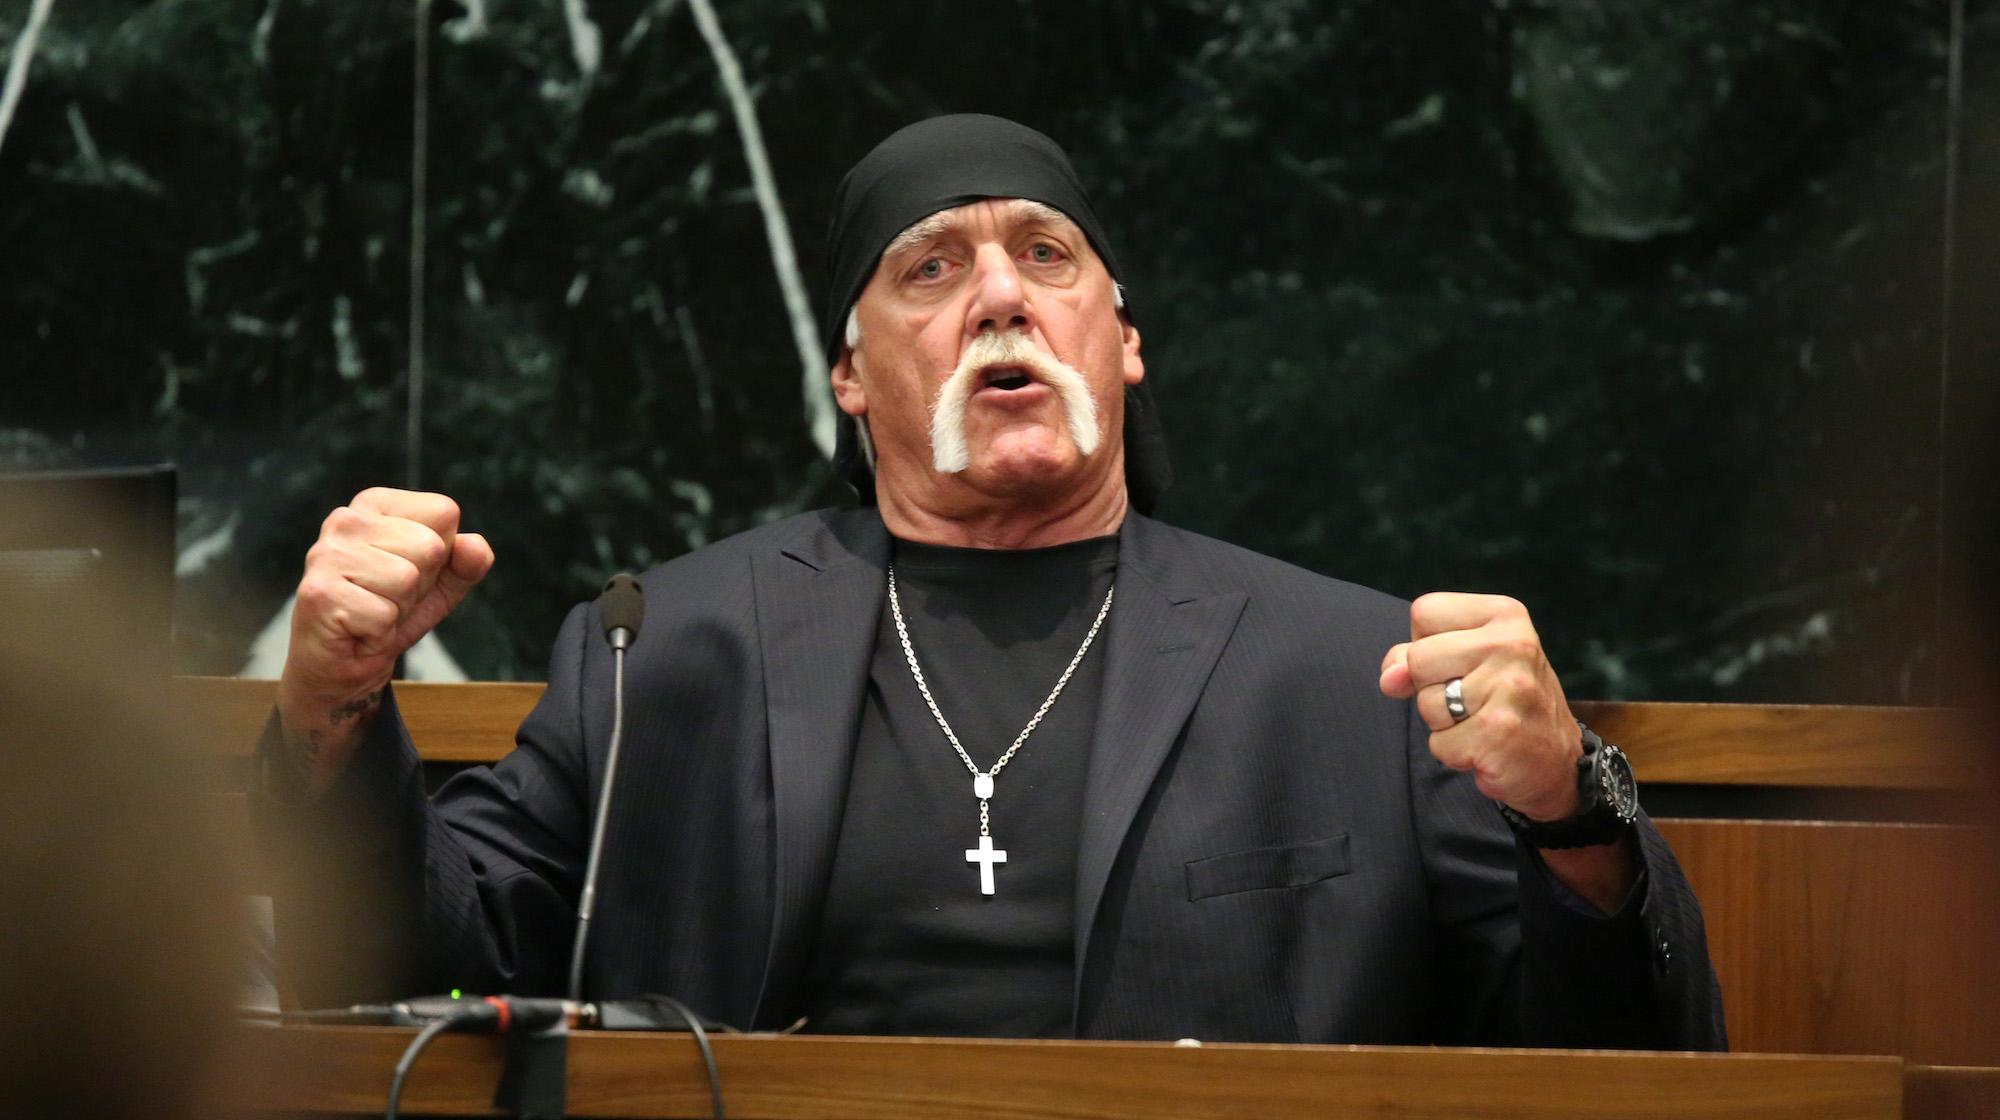 Gawker Settles With Hulk Hogan For 31 Million The Independent